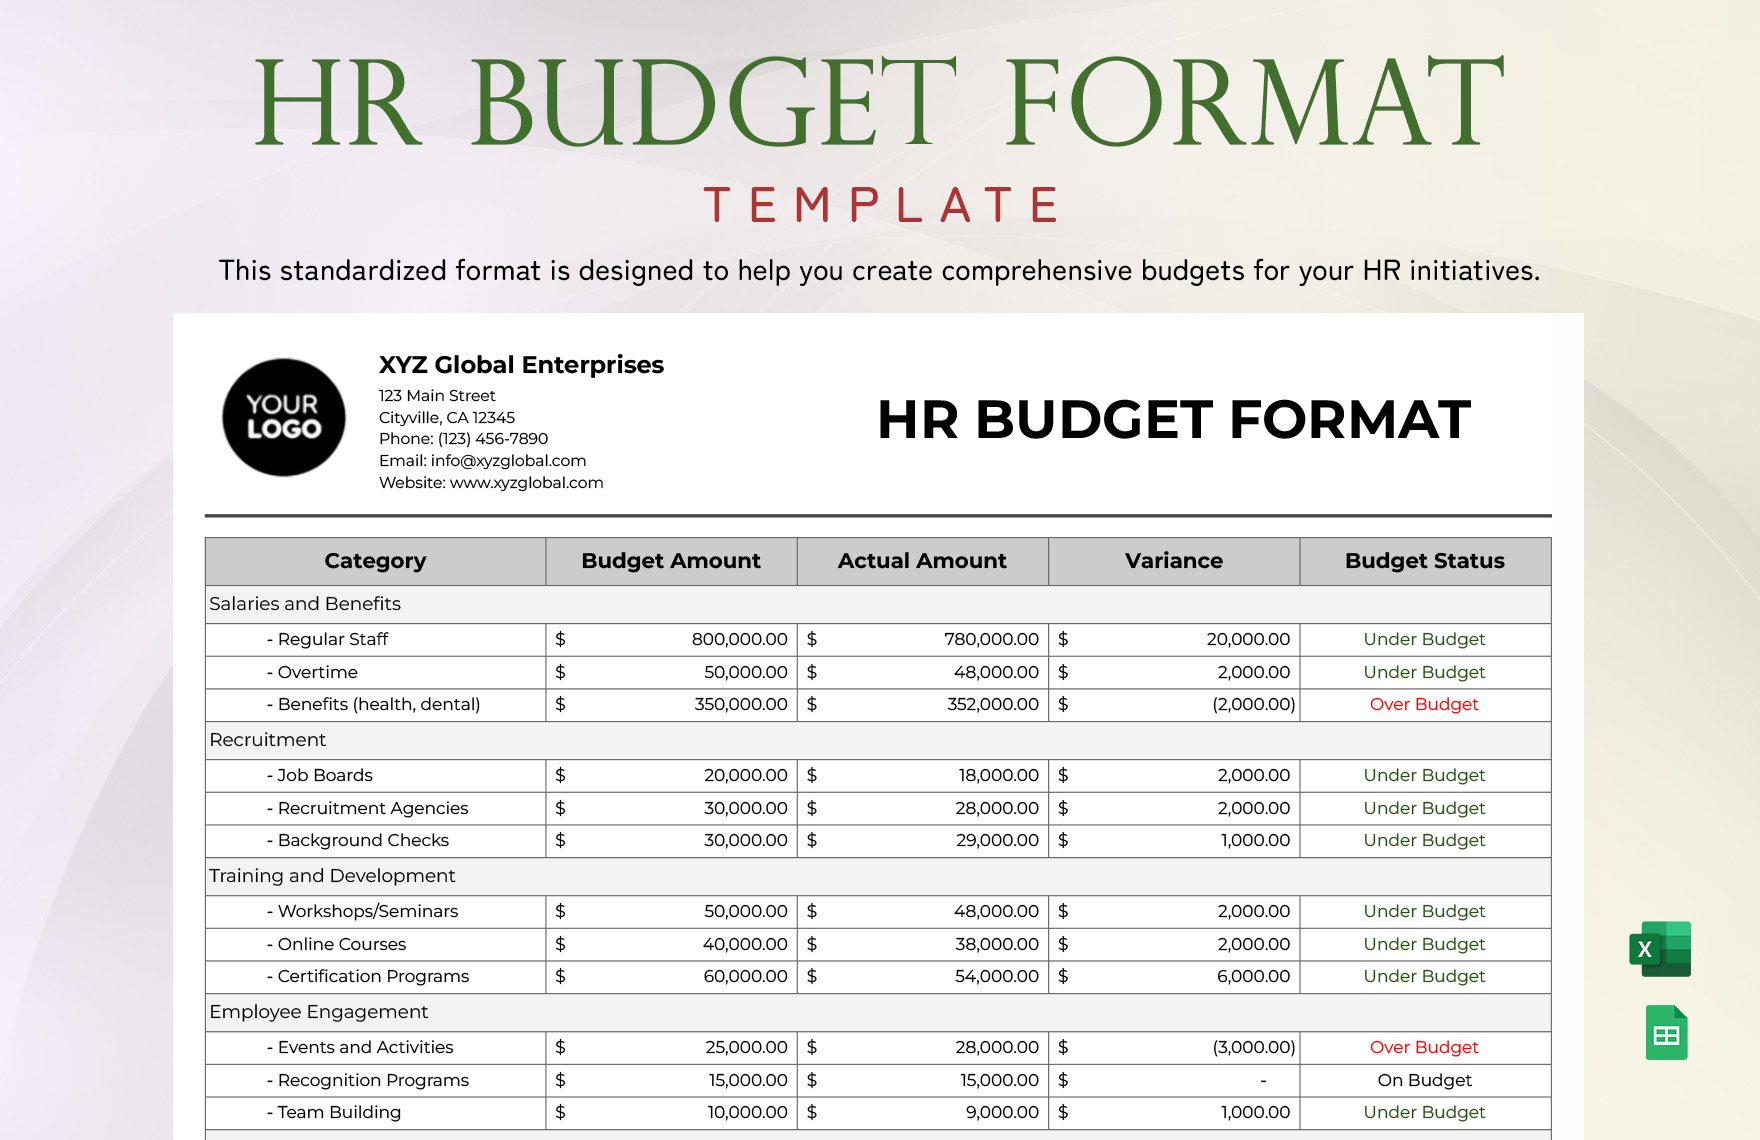 Free HR Budget Format Template in Excel, Google Sheets